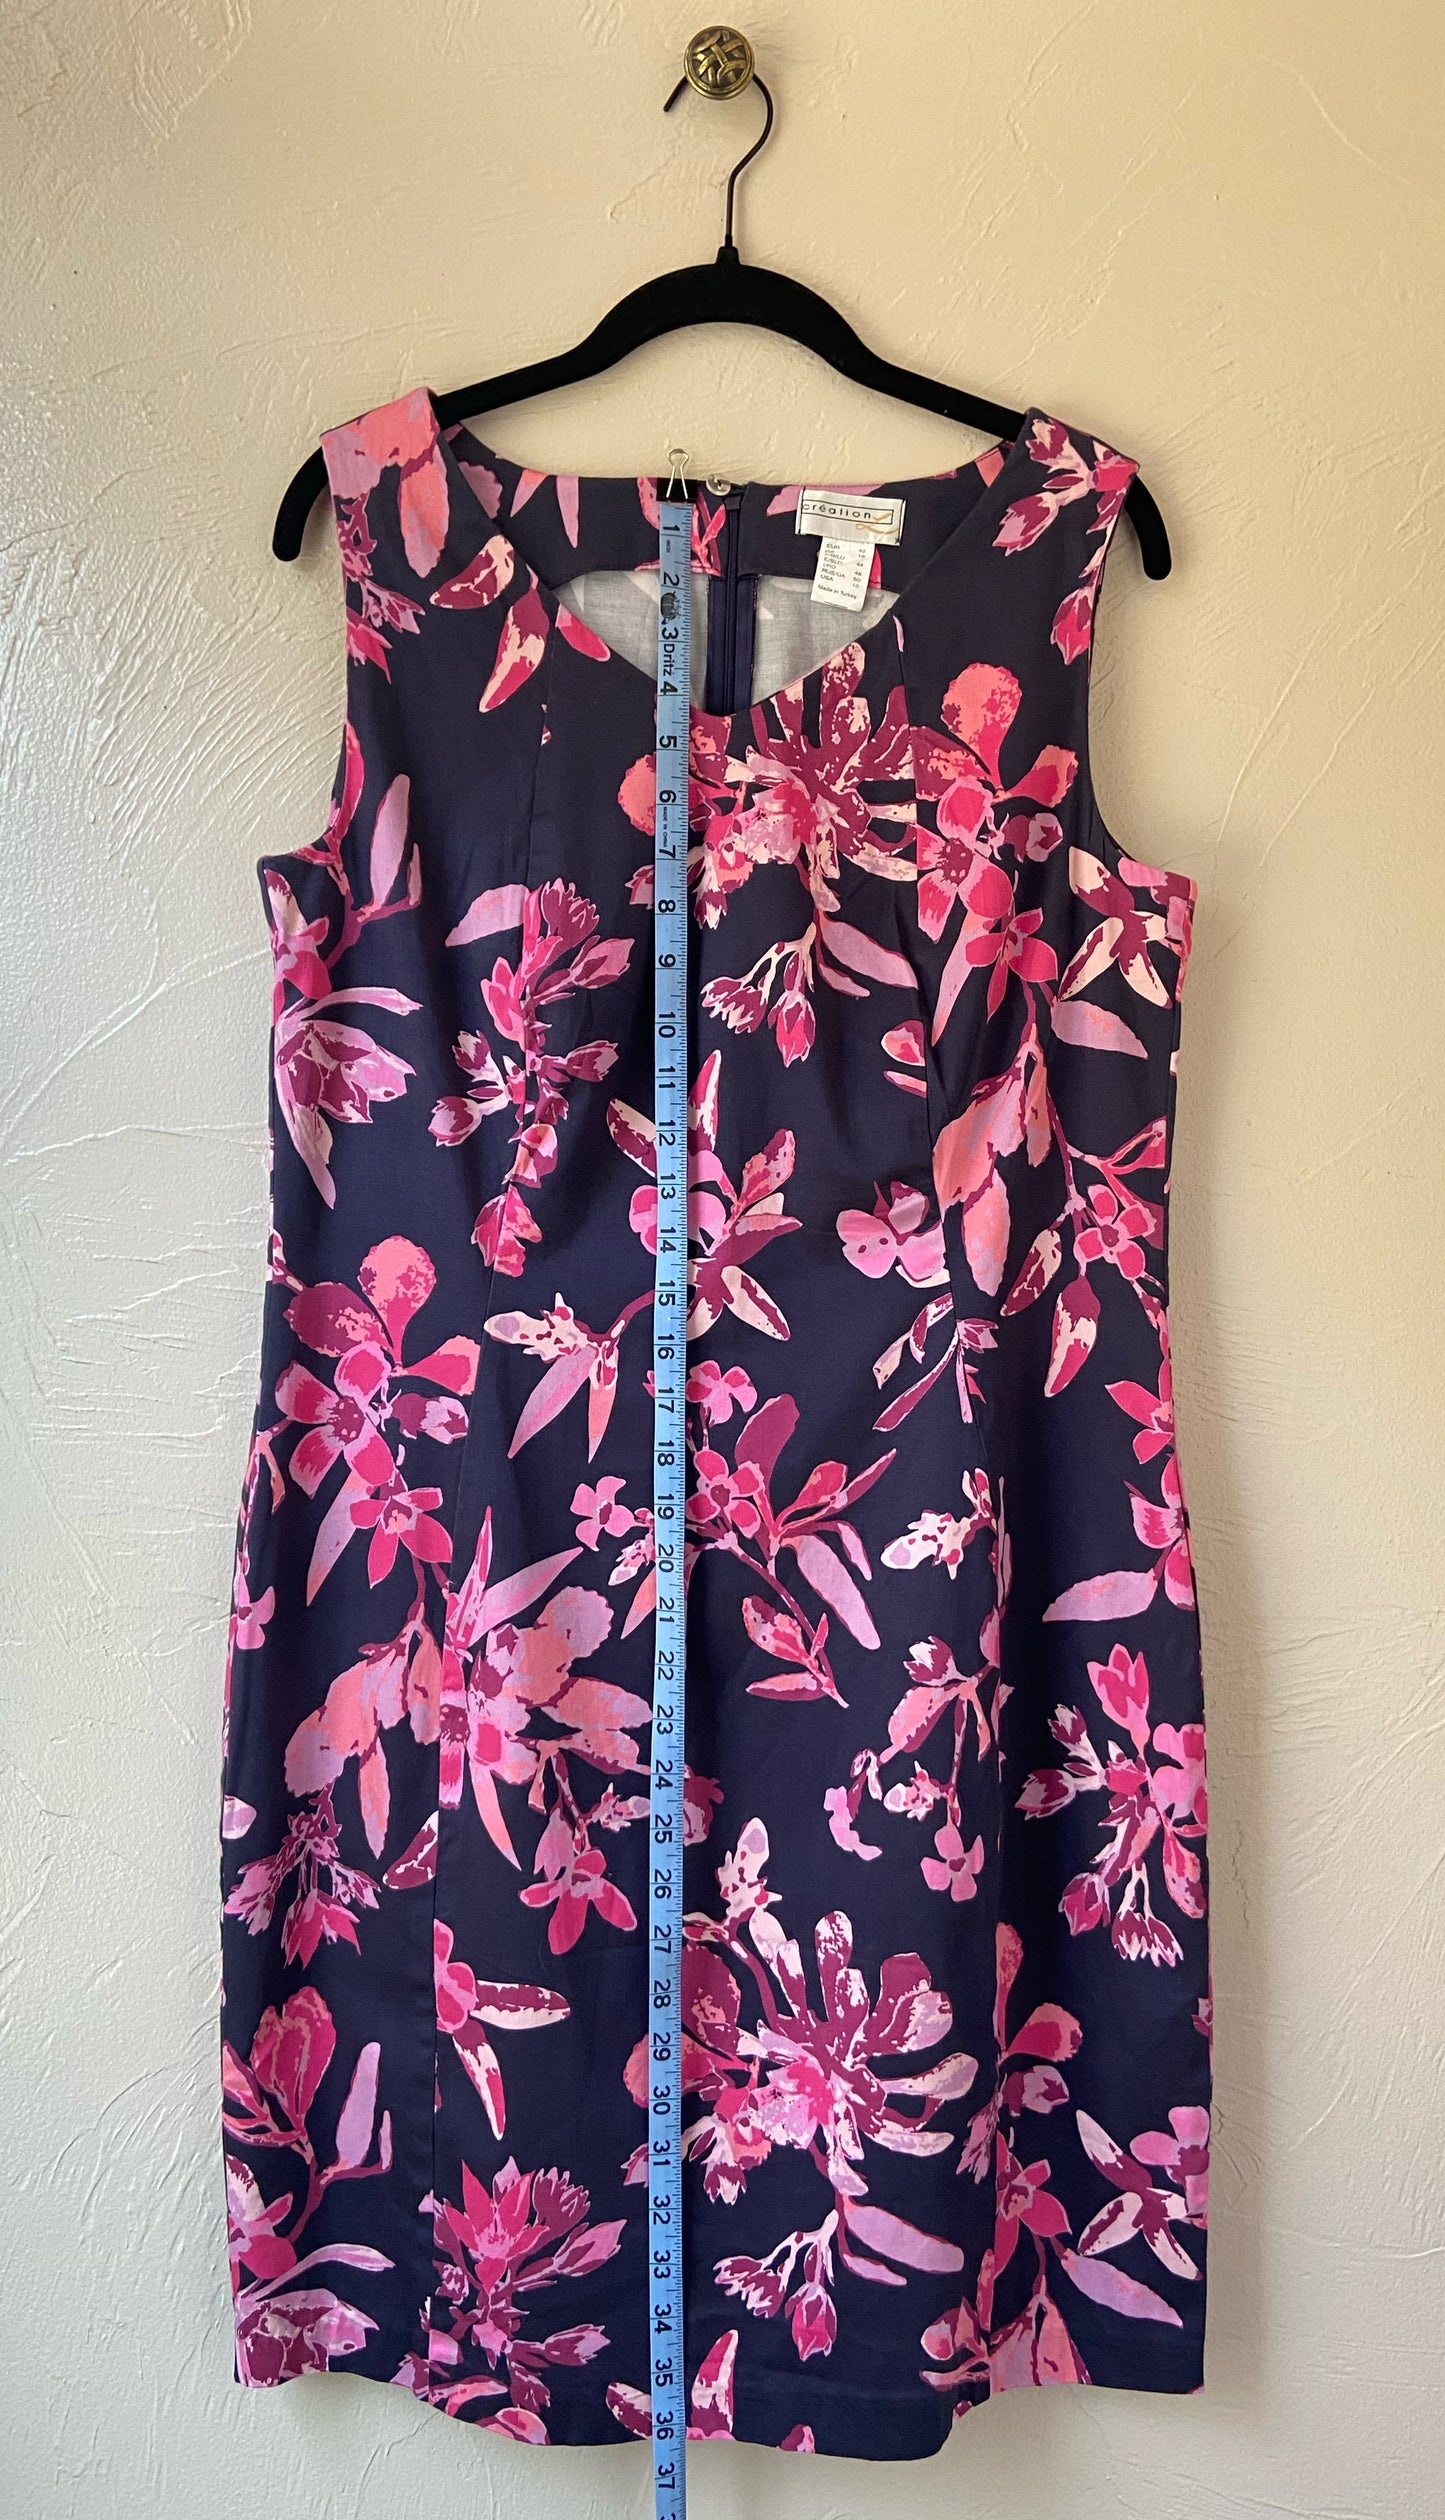 Shades of Pink Flowers on Navy Blue Sheath Dress